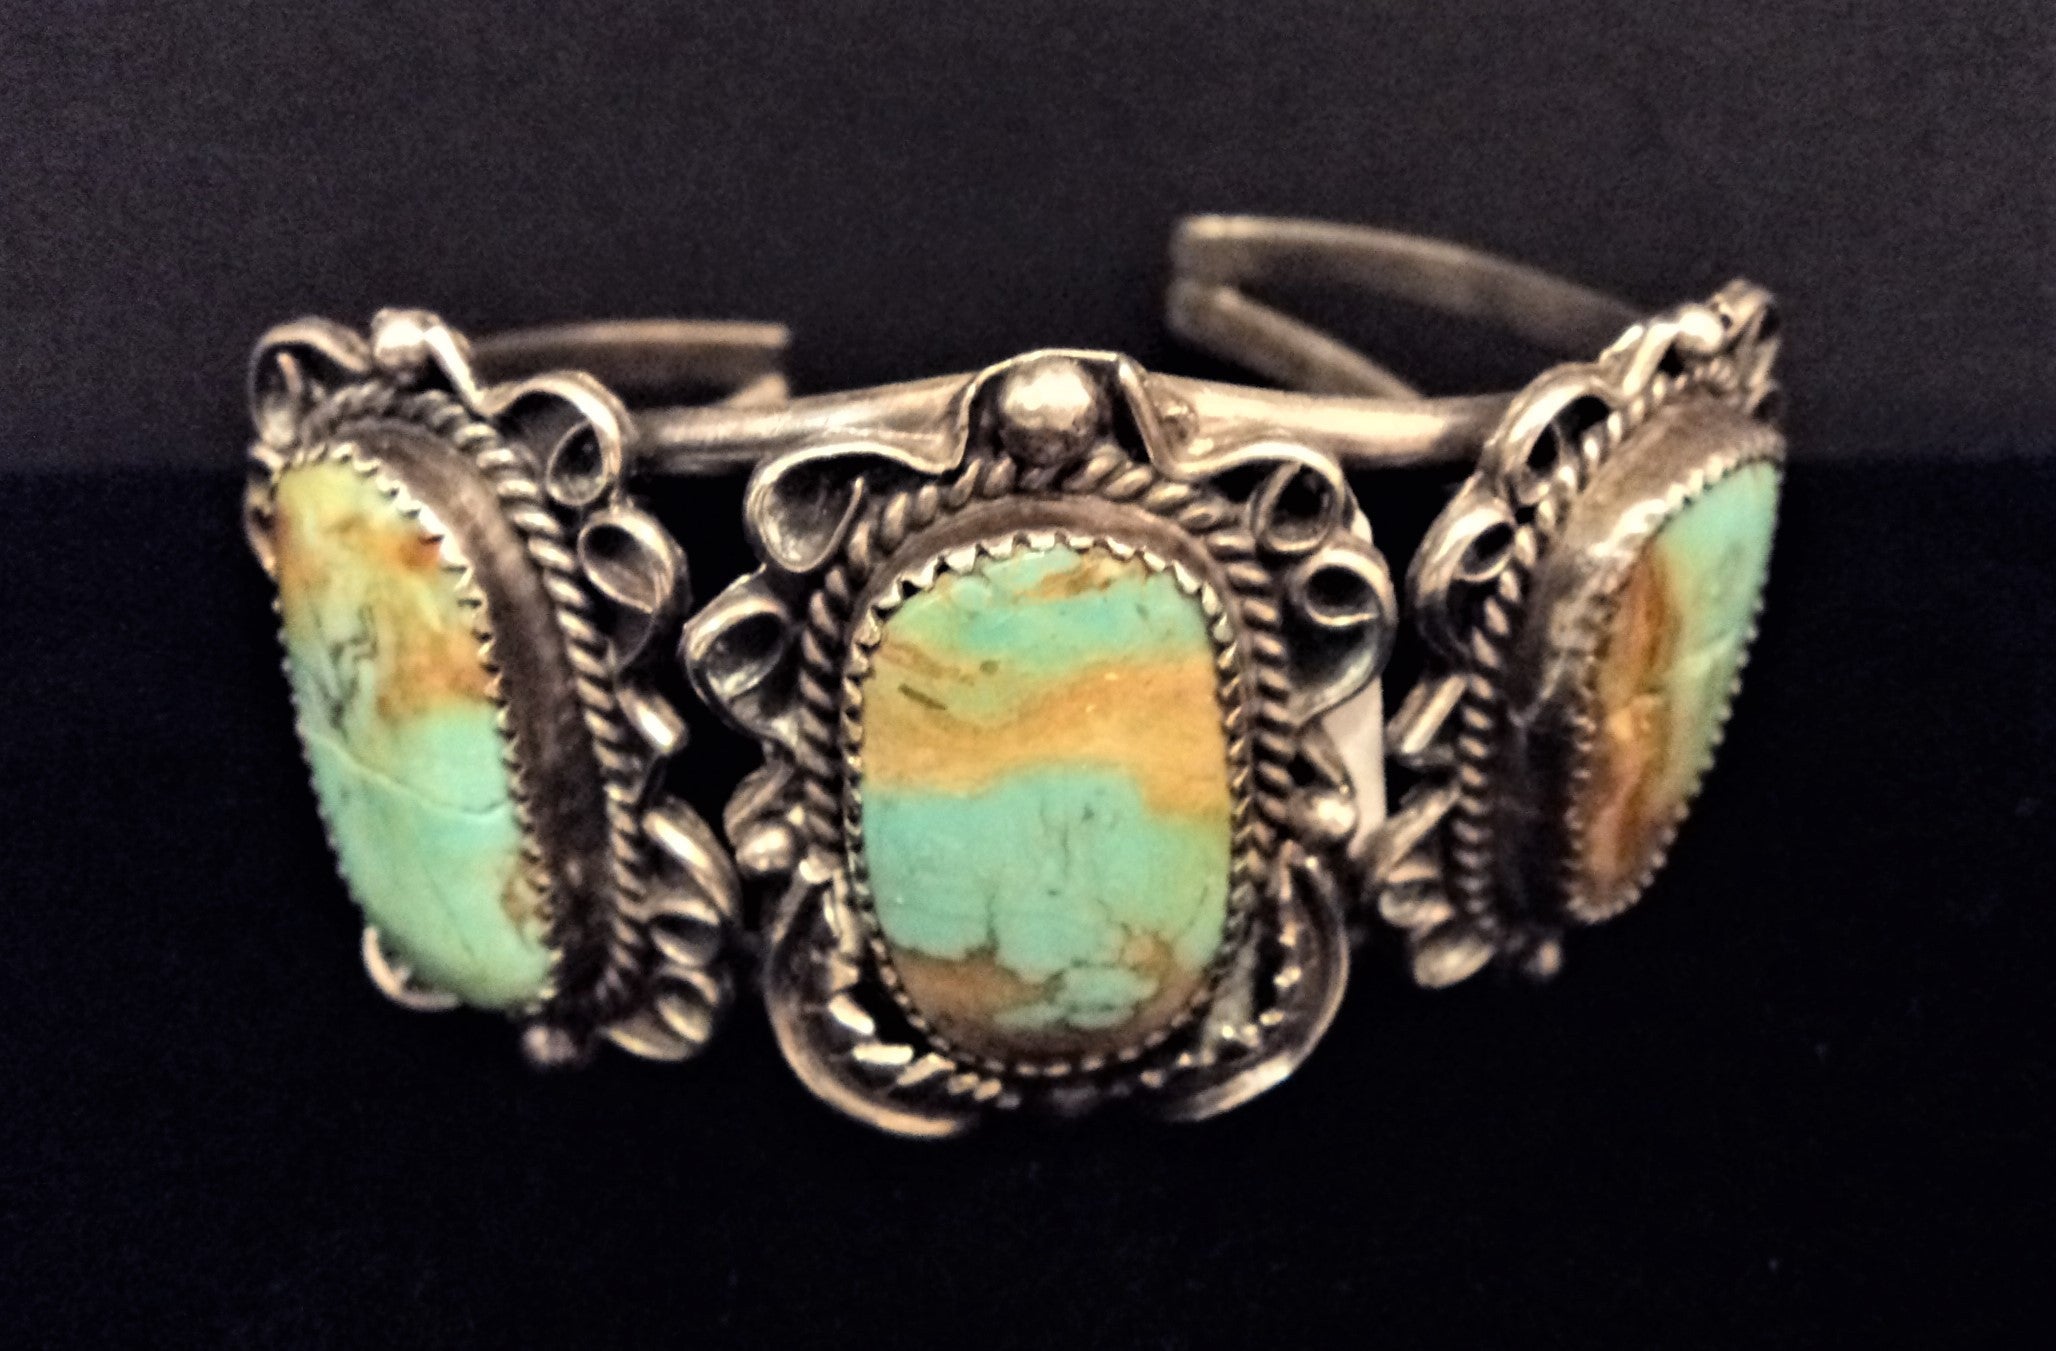 Native American Turquoise and Silver Cuff Bracelet